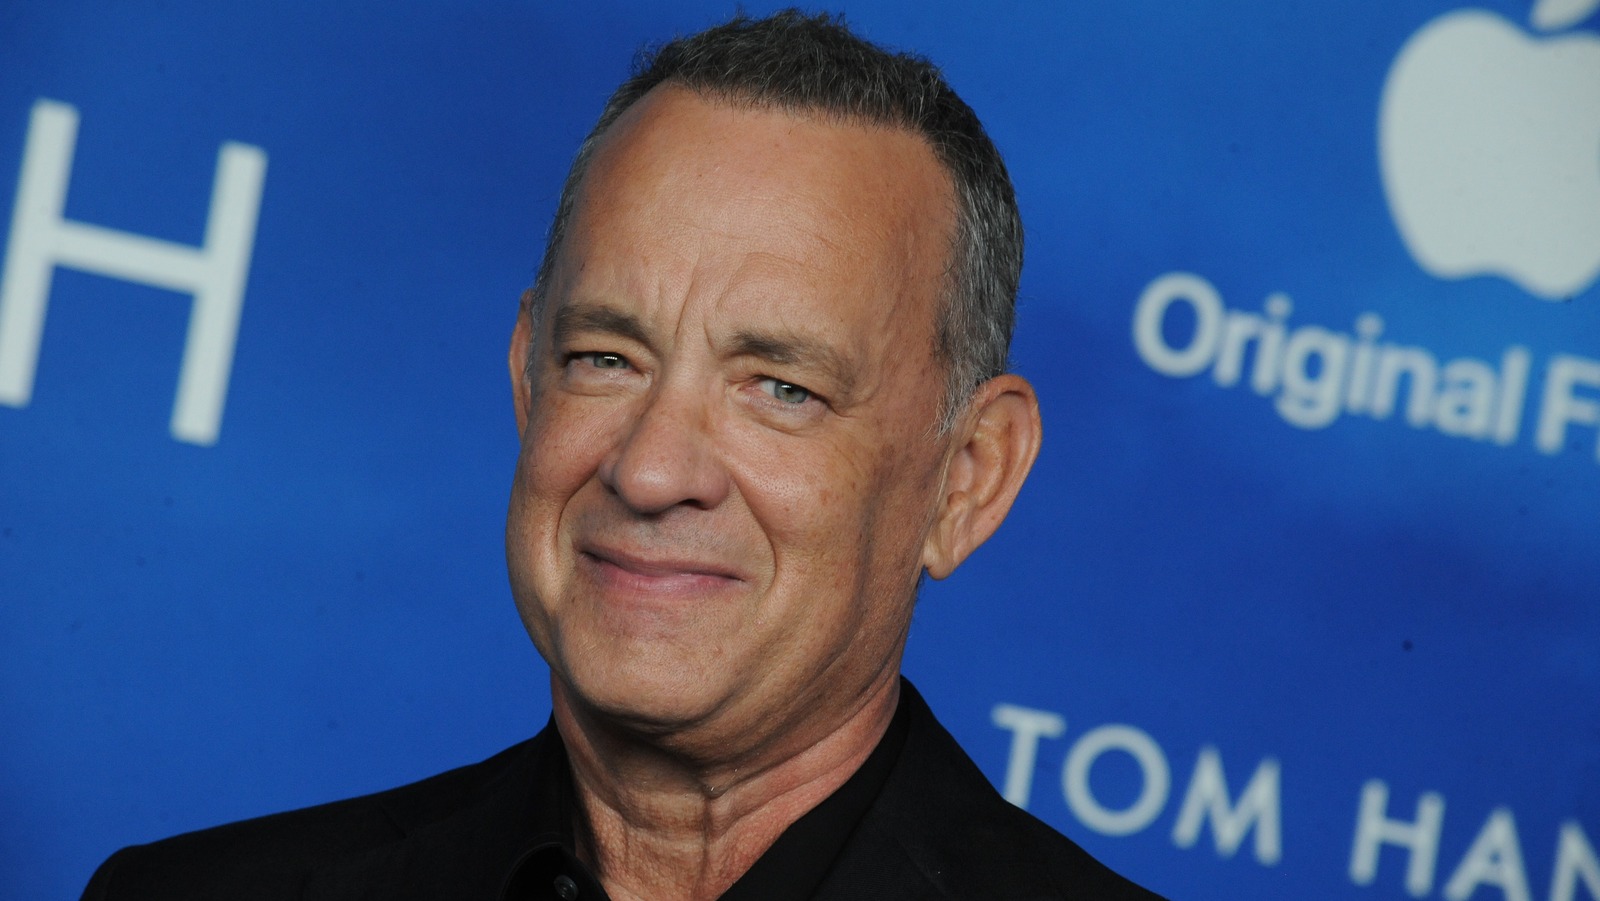 Tom Hanks admitted that he nearly died while filming Cast Away